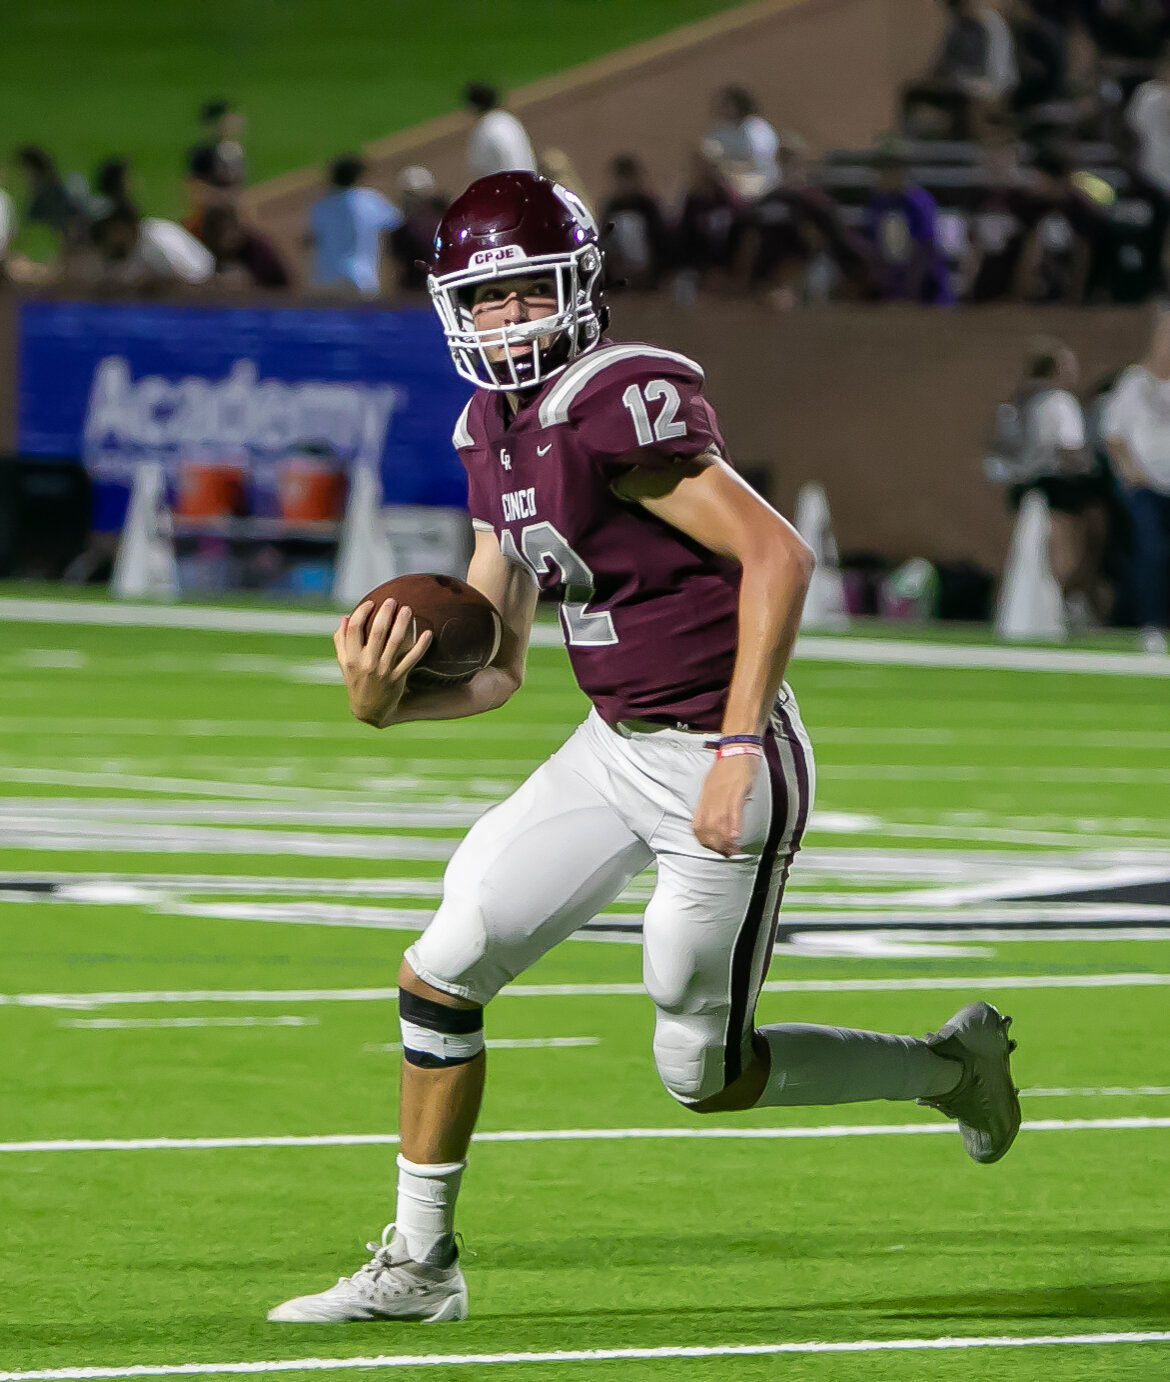 Charlie Adamoli runs the ball during Friday's game between Cinco Ranch and College Park at Rhodes Stadium.